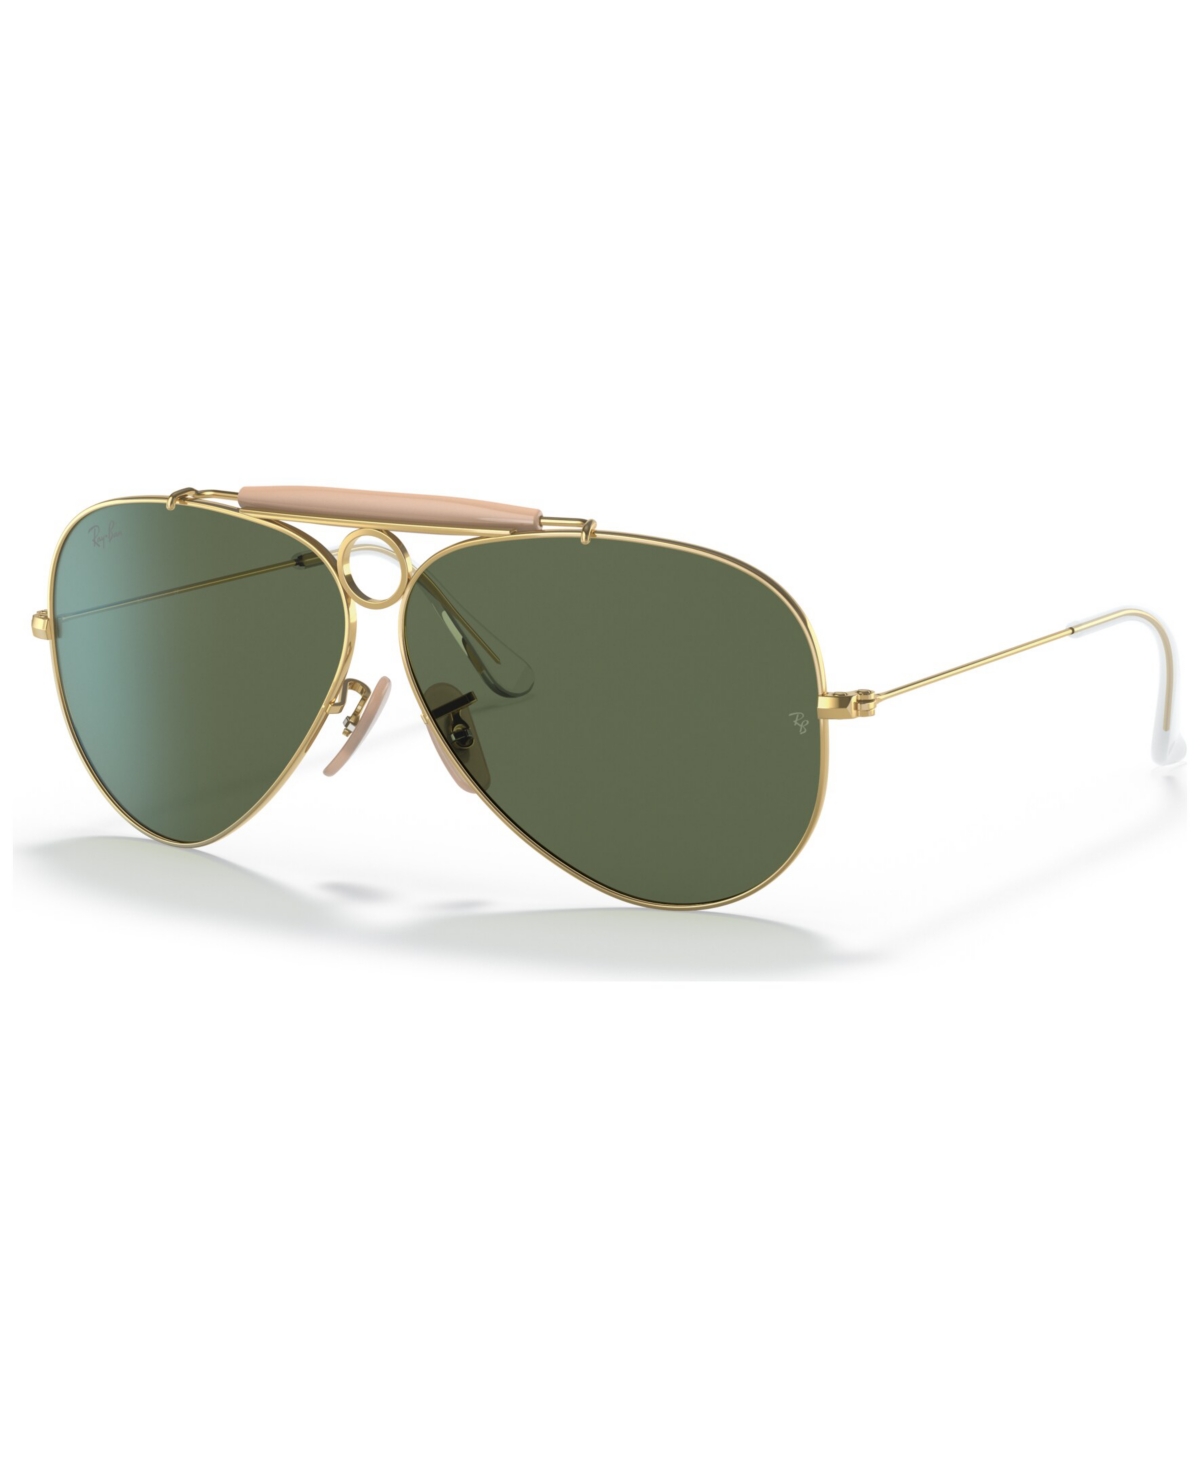 Ray Ban Unisex Outdoorsman Aviation Collection Sunglasses, Rb303058-x 58 In Gold-tone